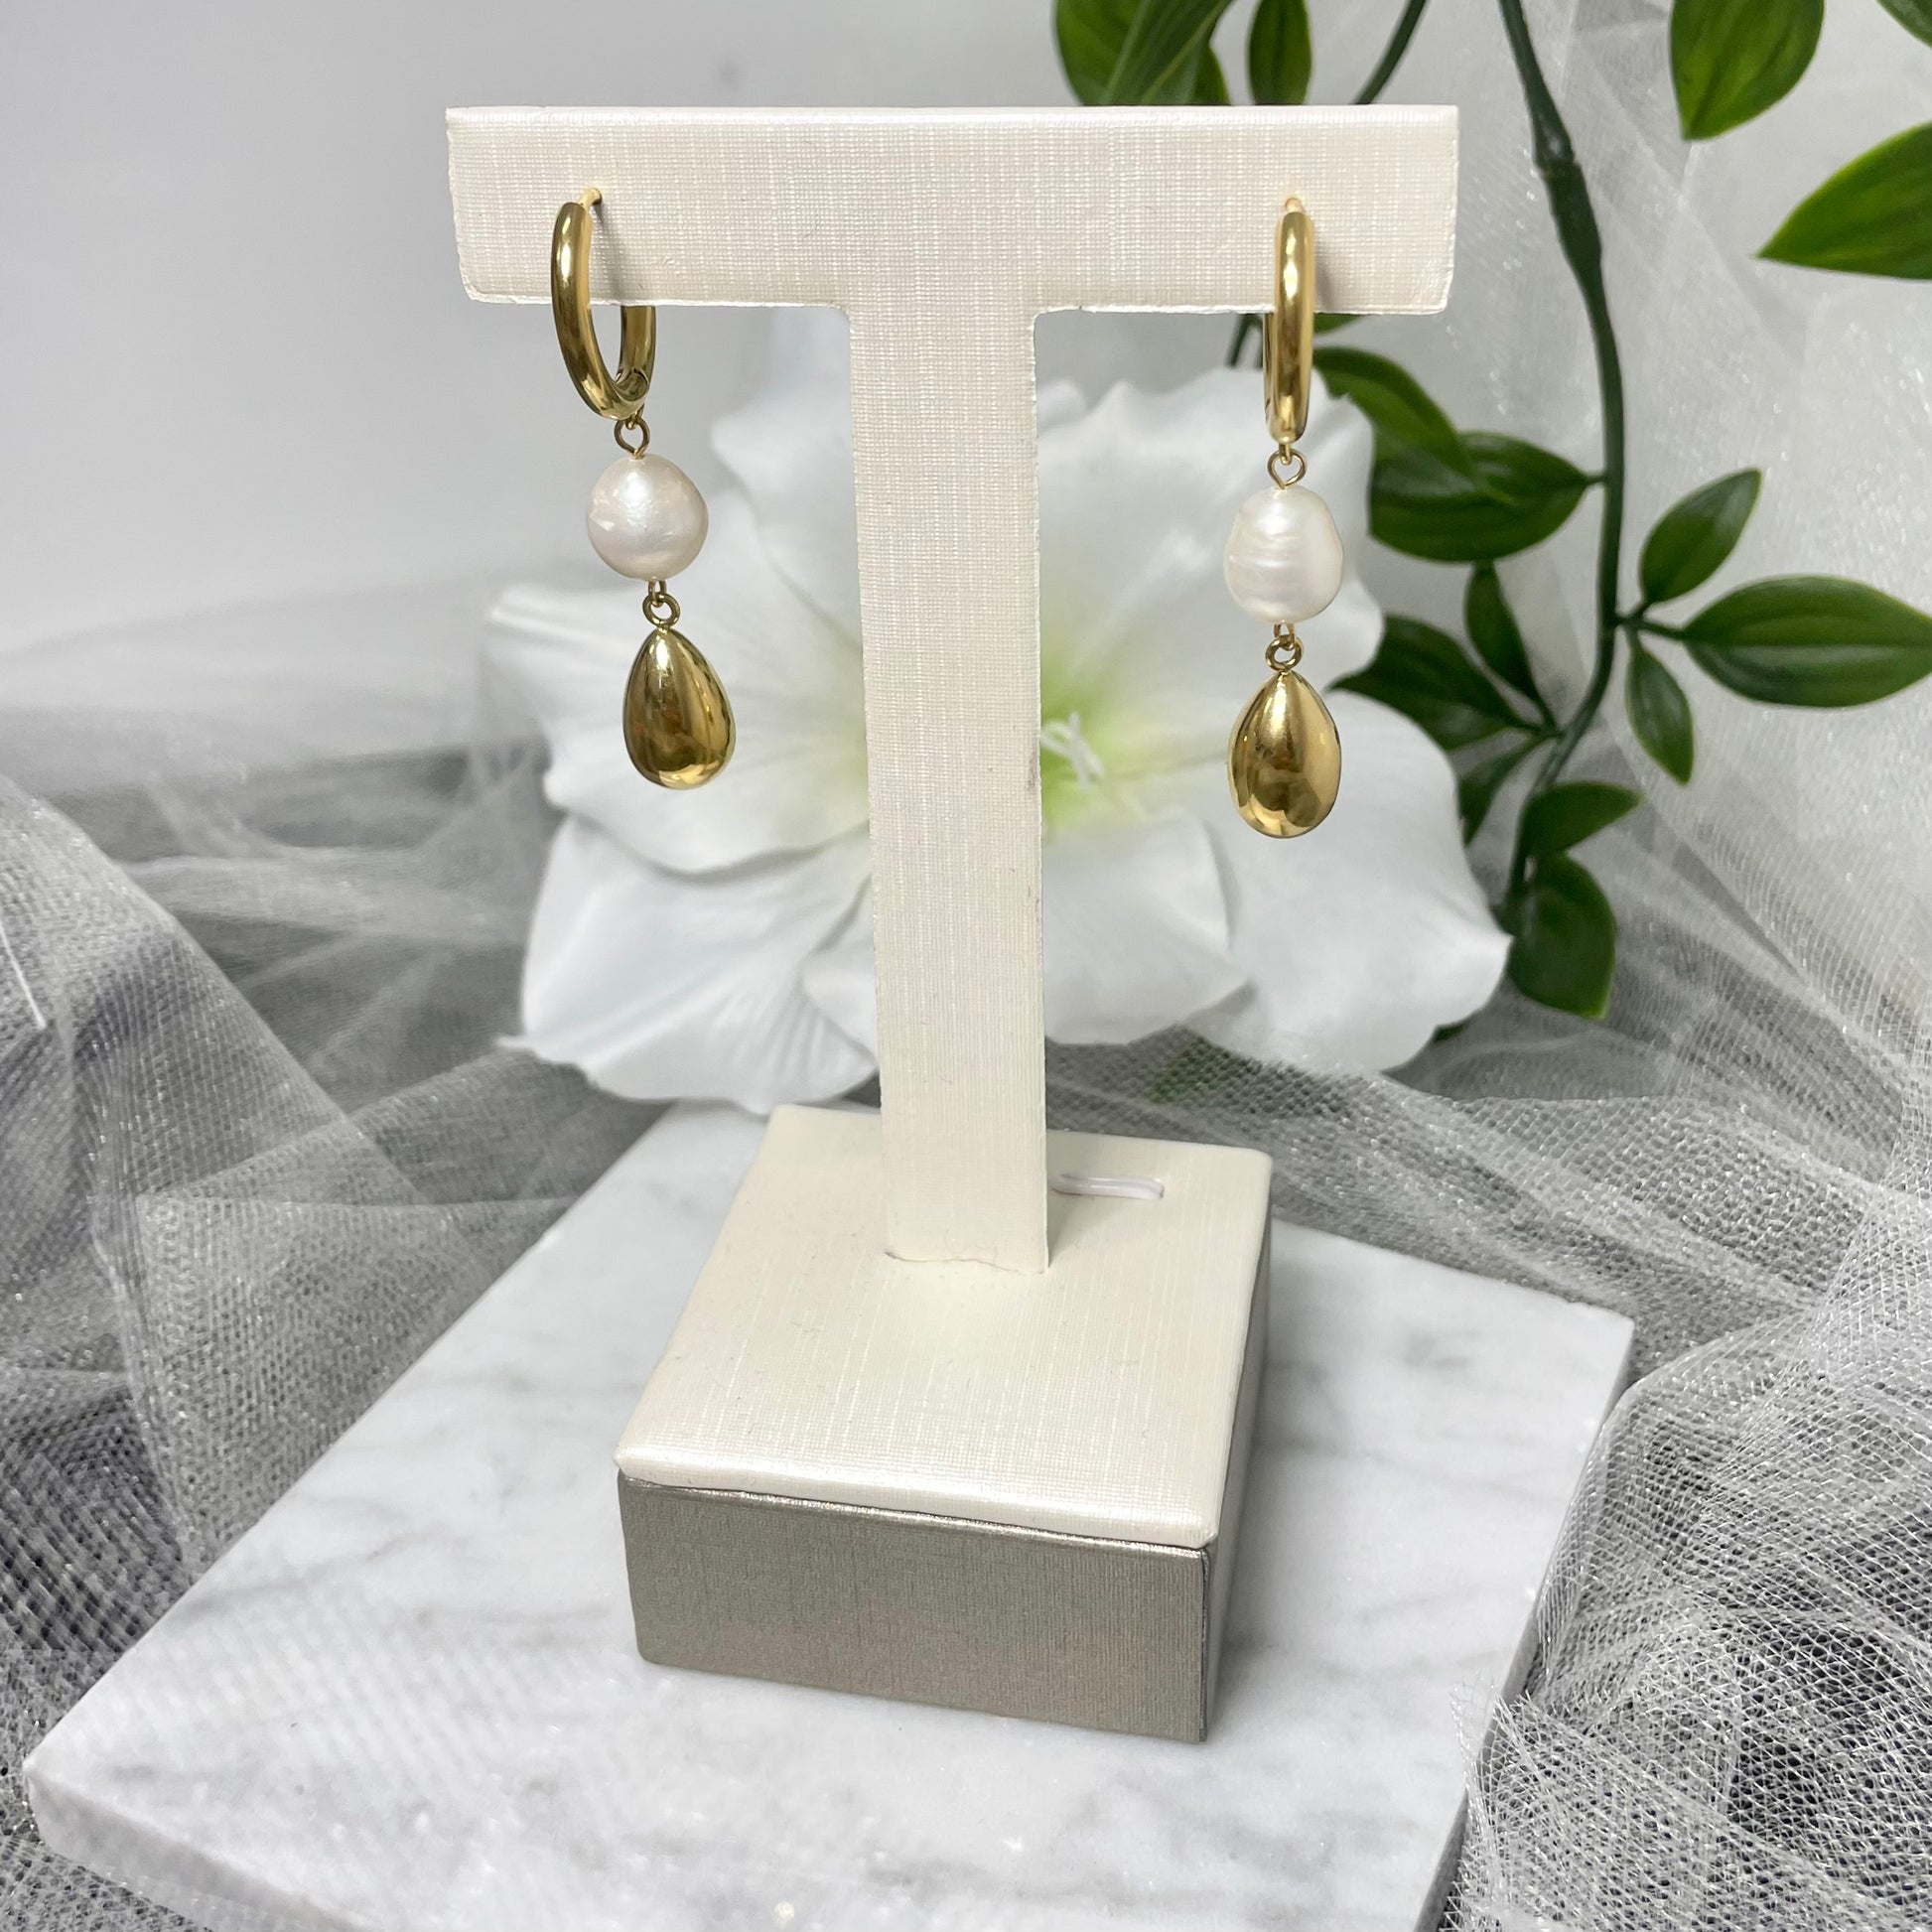 Luminara Waterfall Pearl Earrings in 18k Gold Plated Stainless Steel with Natural Freshwater Pearl Drop